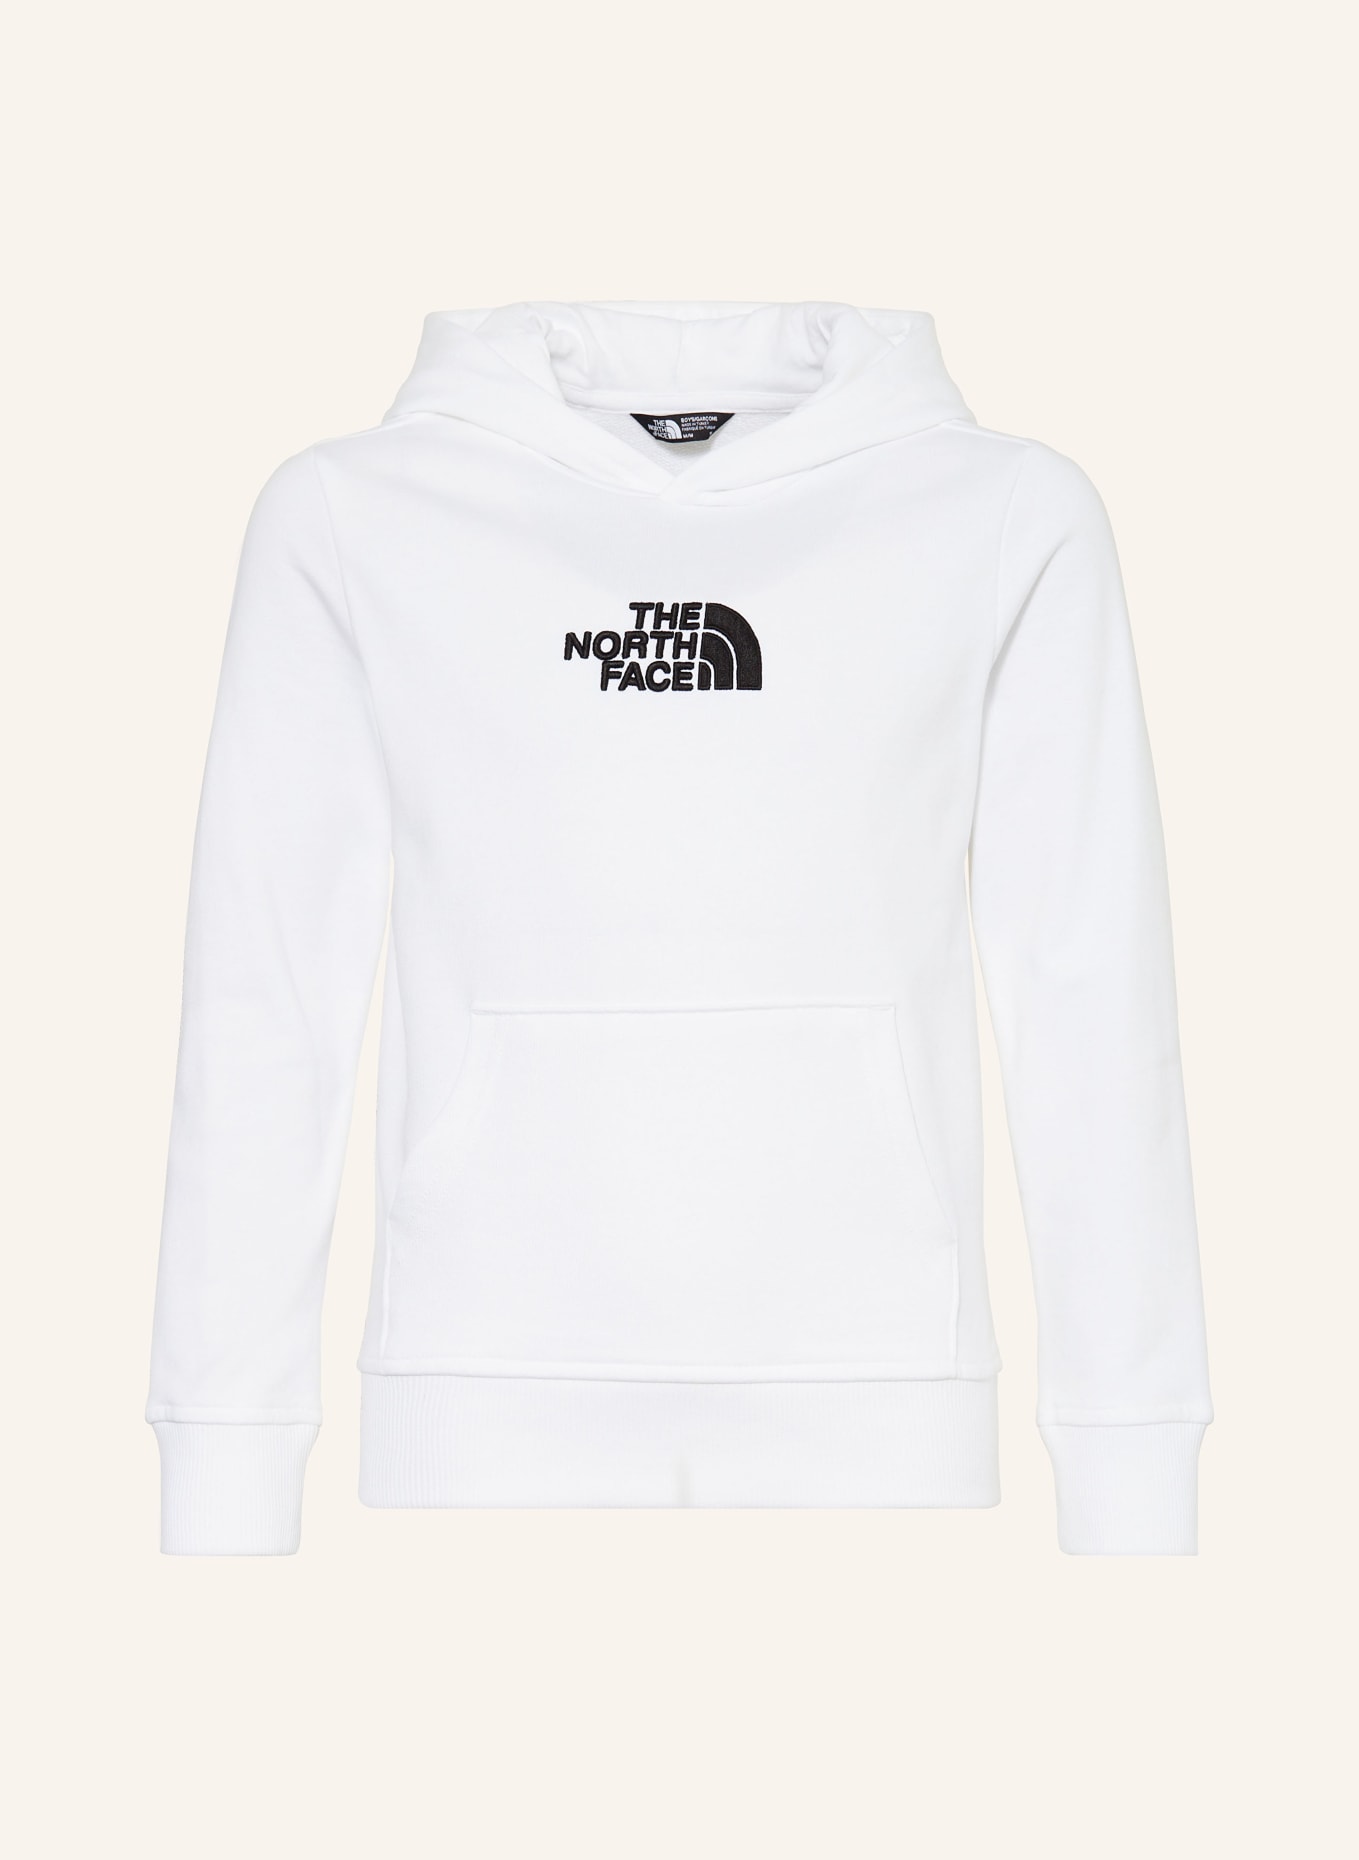 THE NORTH FACE Hoodie, Farbe: WEISS (Bild 1)